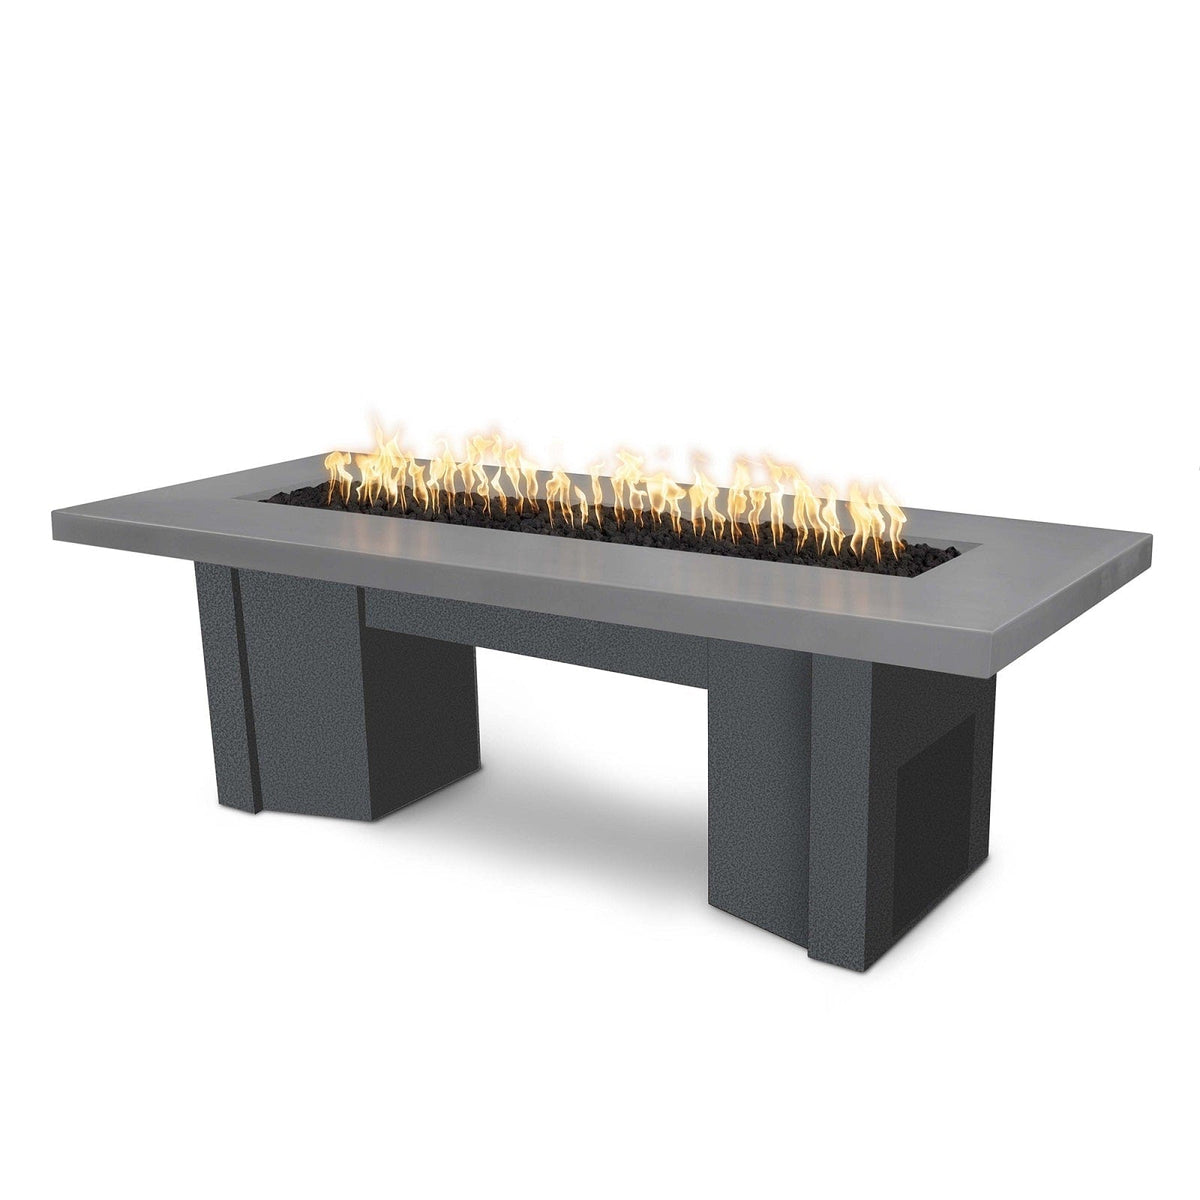 The Outdoor Plus Fire Features Natural Gray (-NGY) / Silver Vein Powder Coated Steel (-SLV) The Outdoor Plus 60&quot; Alameda Fire Table Smooth Concrete in Liquid Propane - Match Lit / OPT-ALMGFRC60-LP